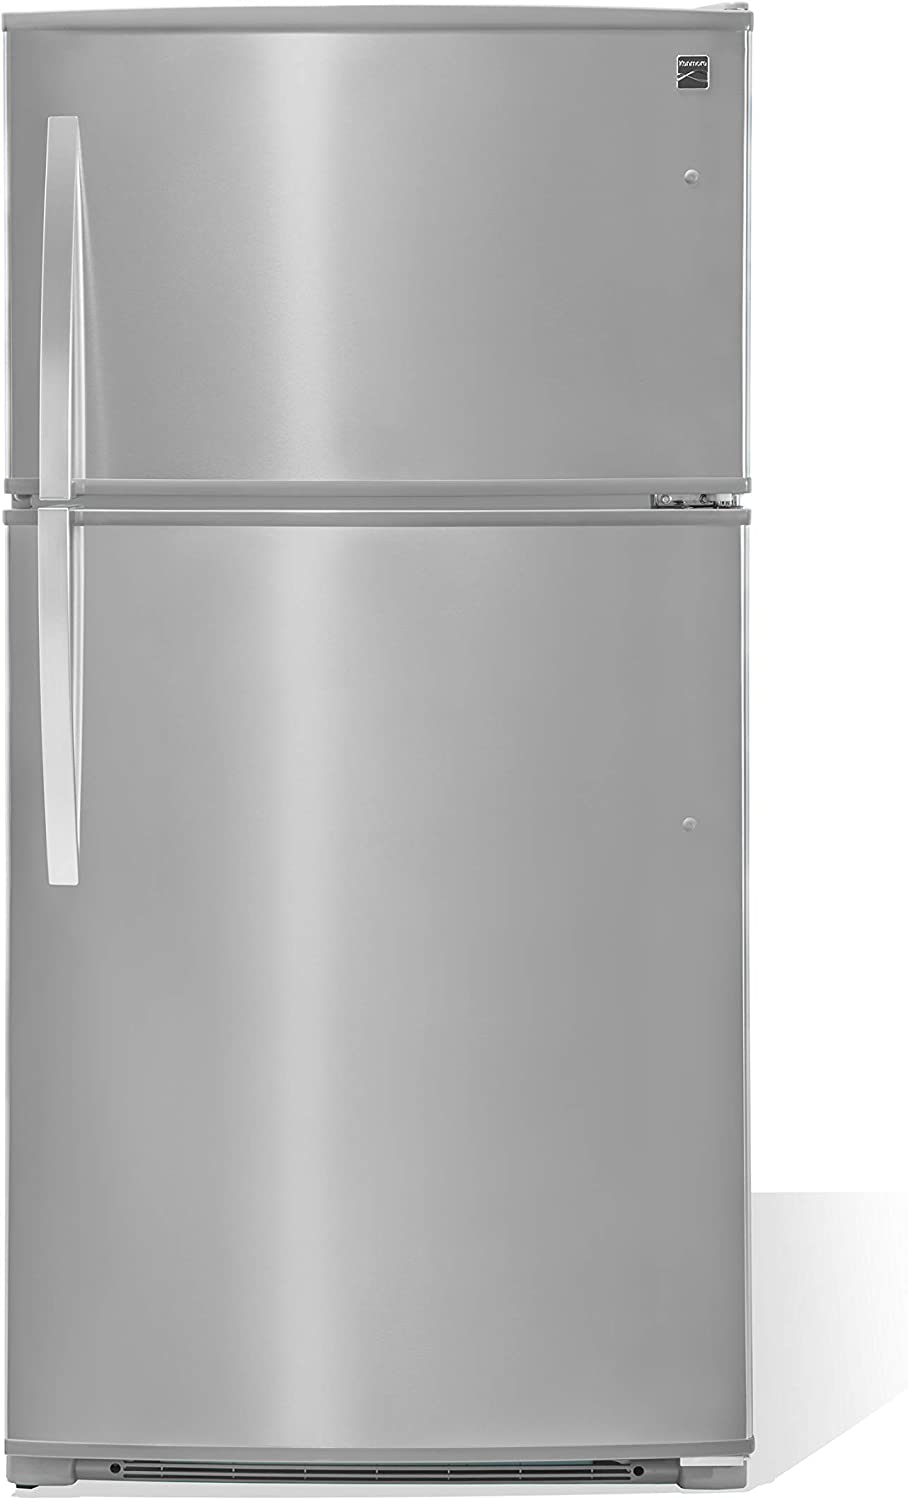 Kenmore Stainless Steel Refrigerator with 21 Cu. Ft. Capacity